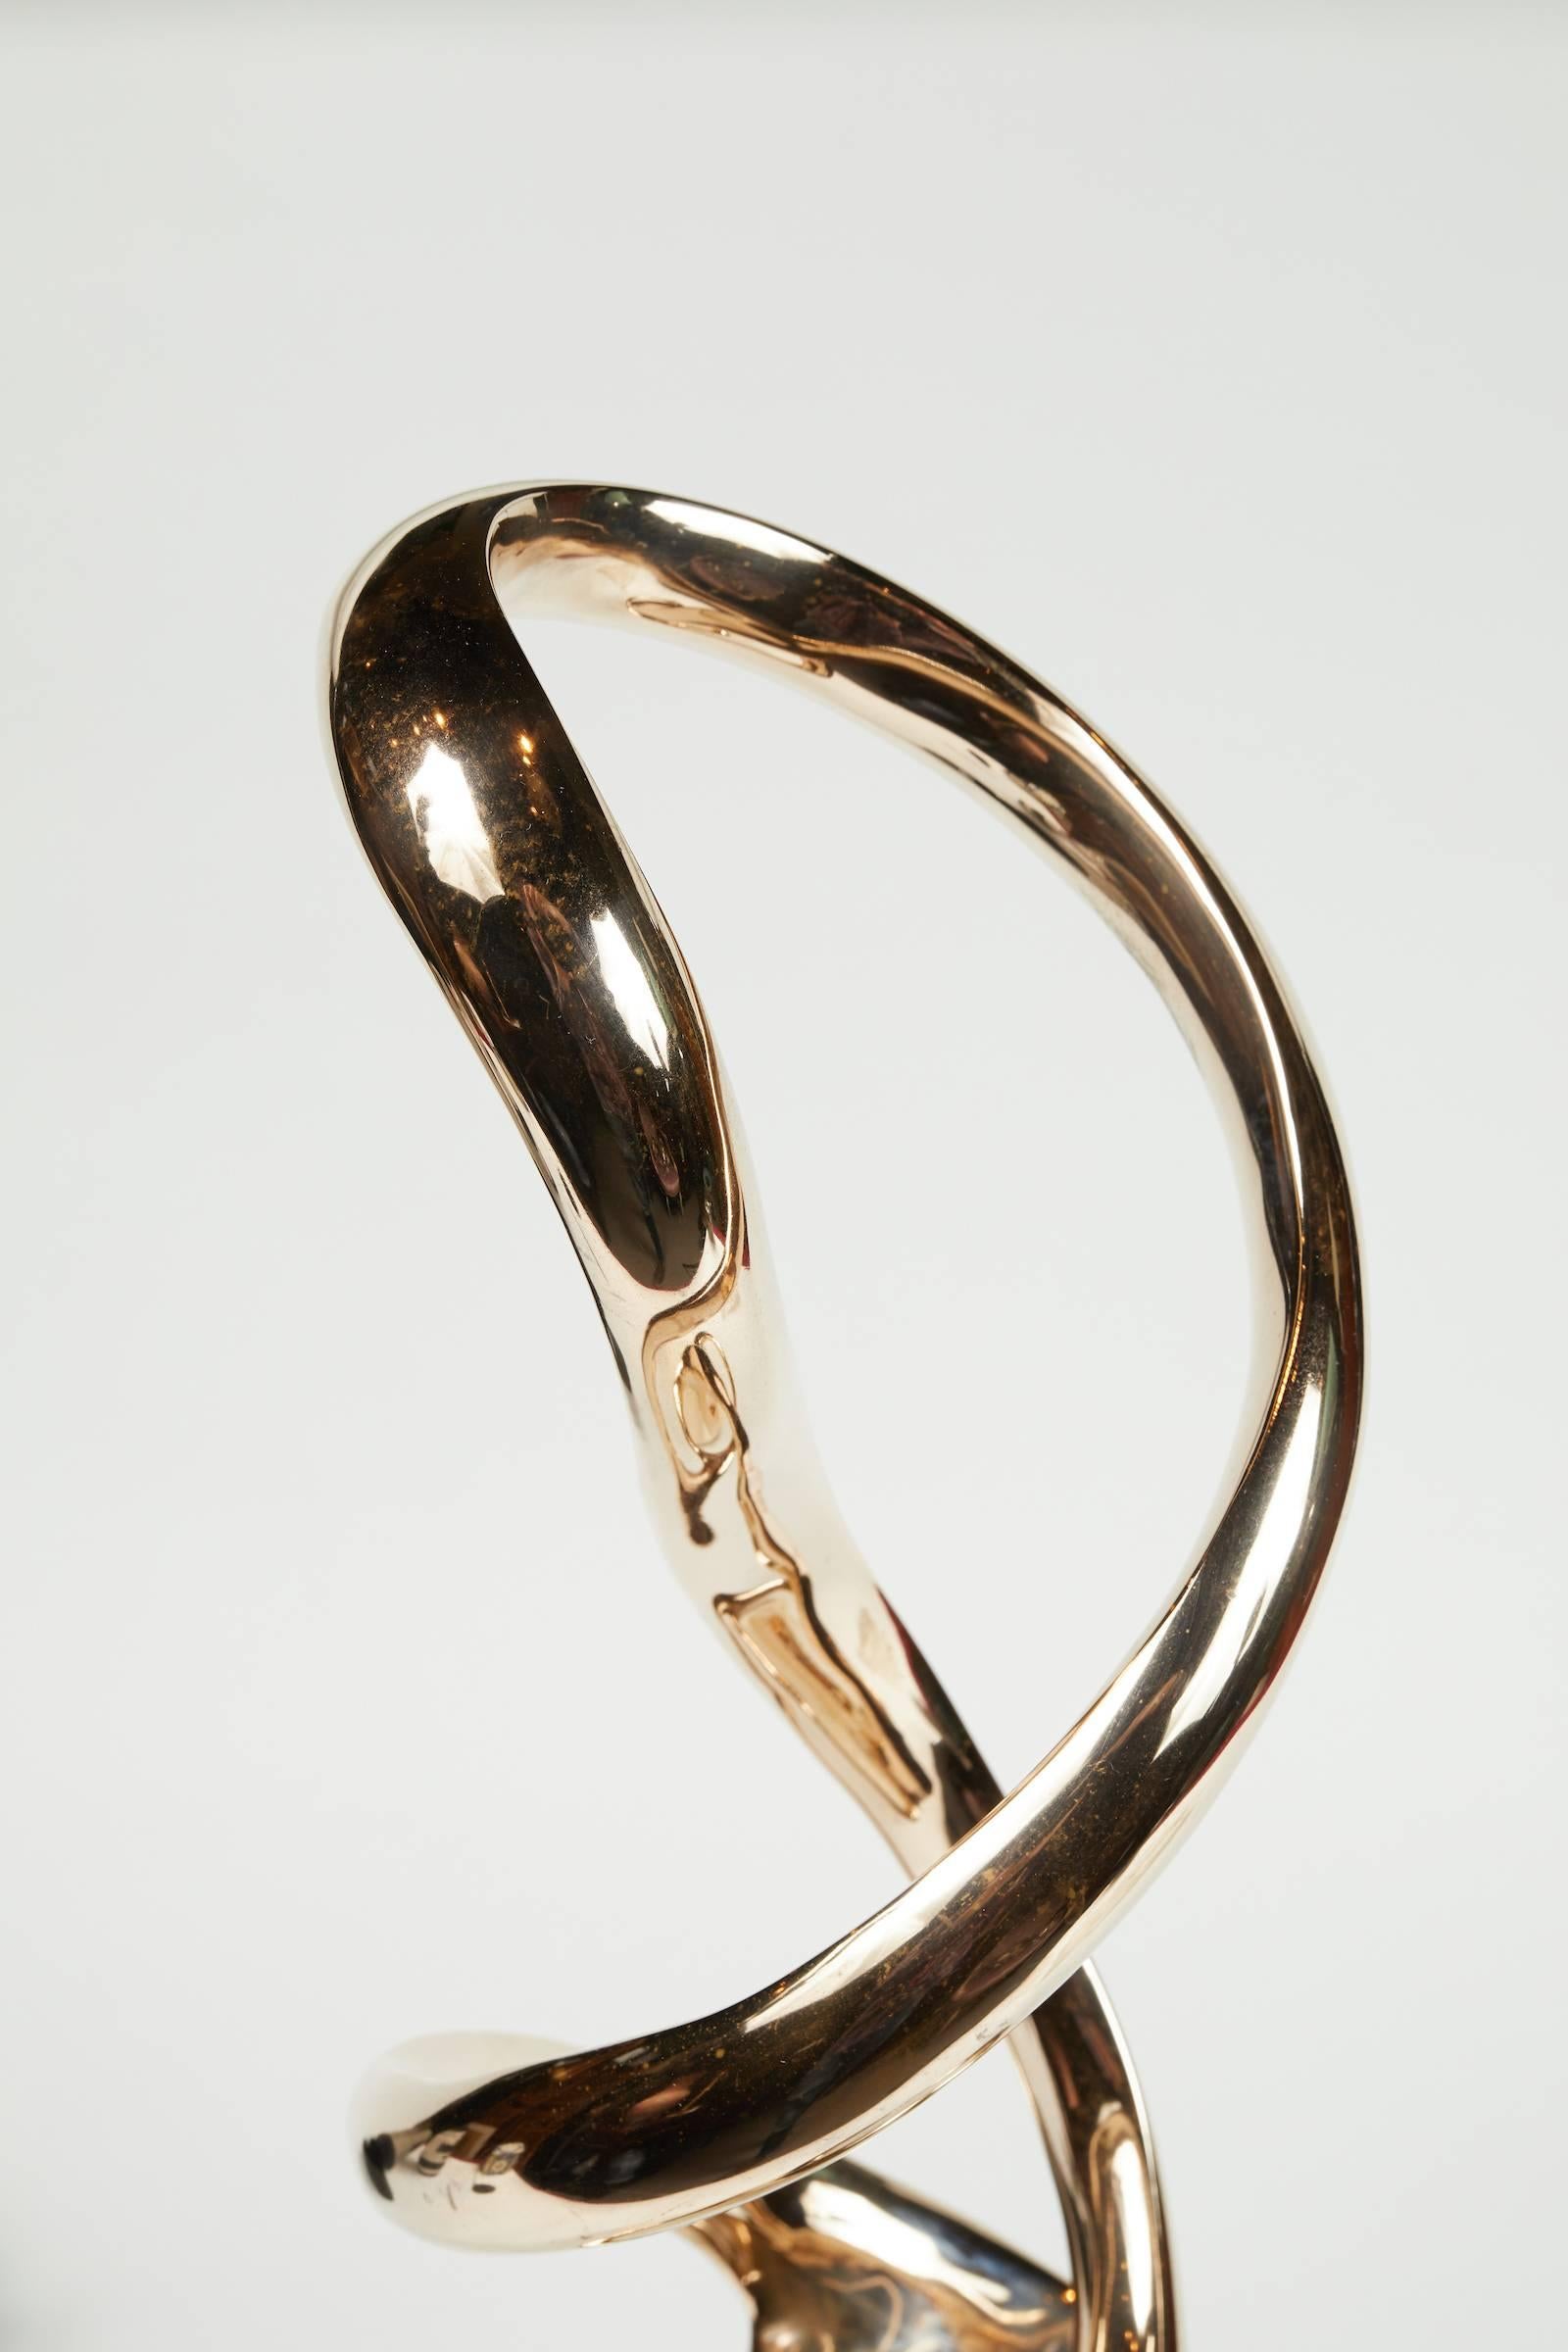 Abstract Polished Bronze Sculpture by Kieff 1